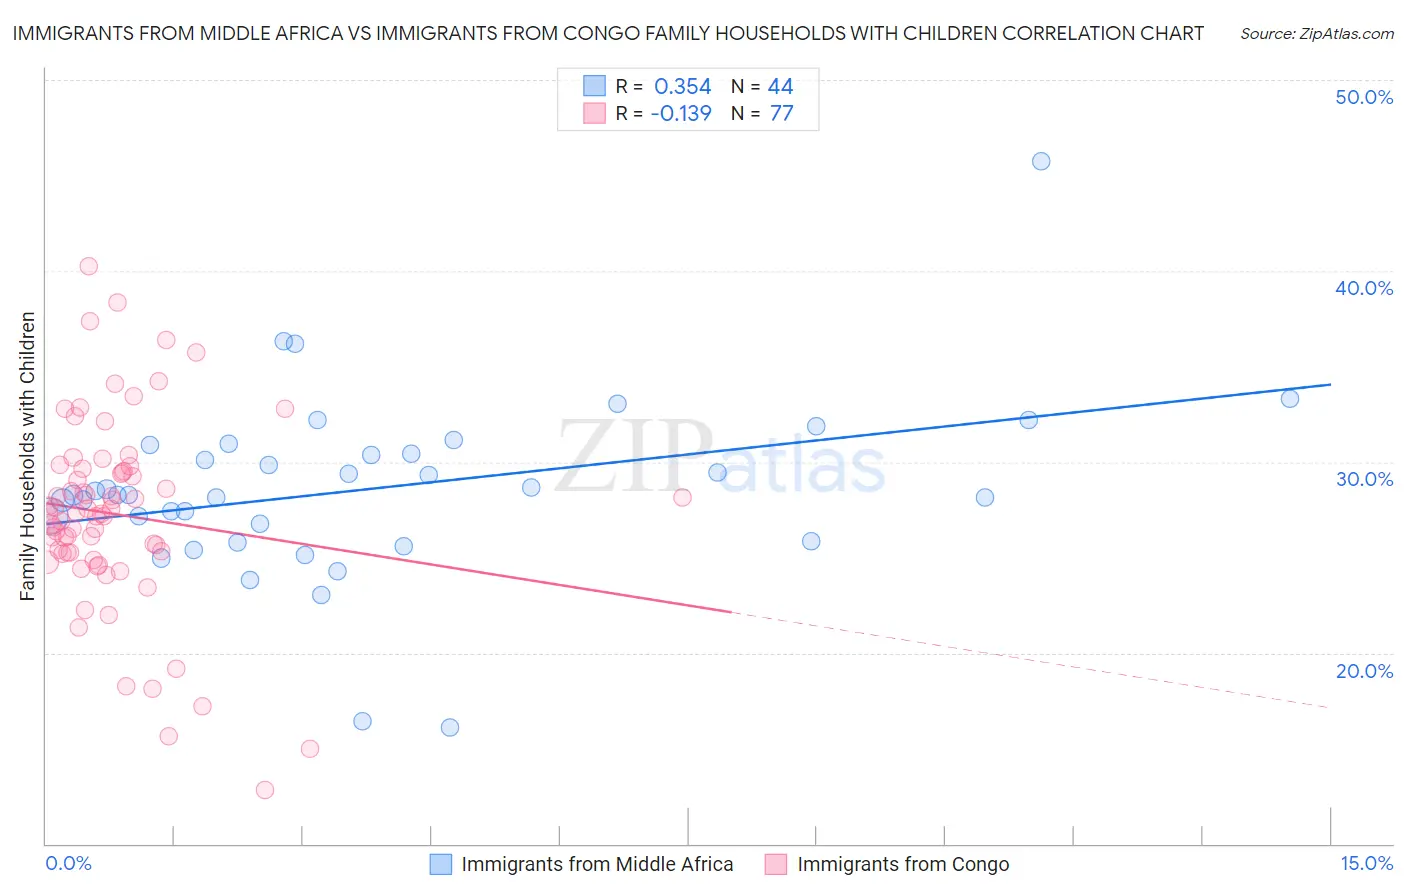 Immigrants from Middle Africa vs Immigrants from Congo Family Households with Children